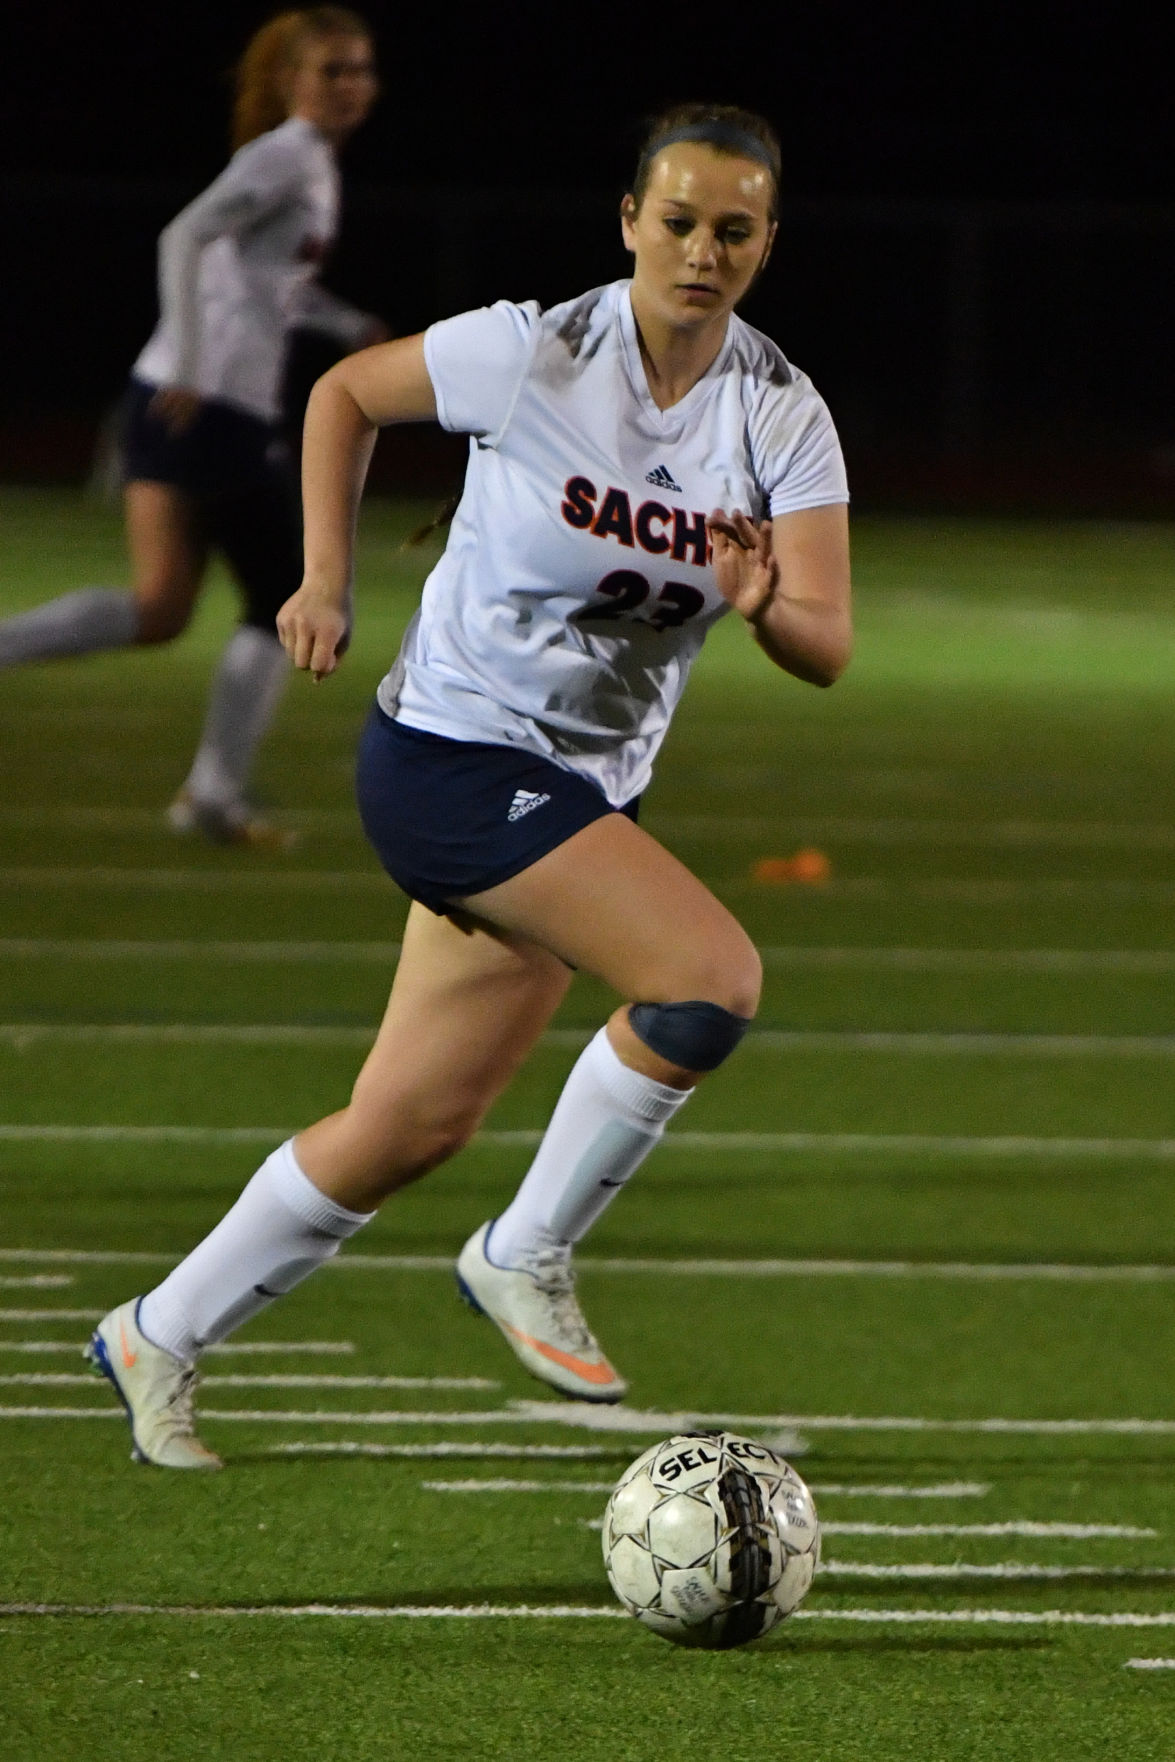 Champs Again: Sachse edges Naaman Forest to claim 10-6A title | Sports